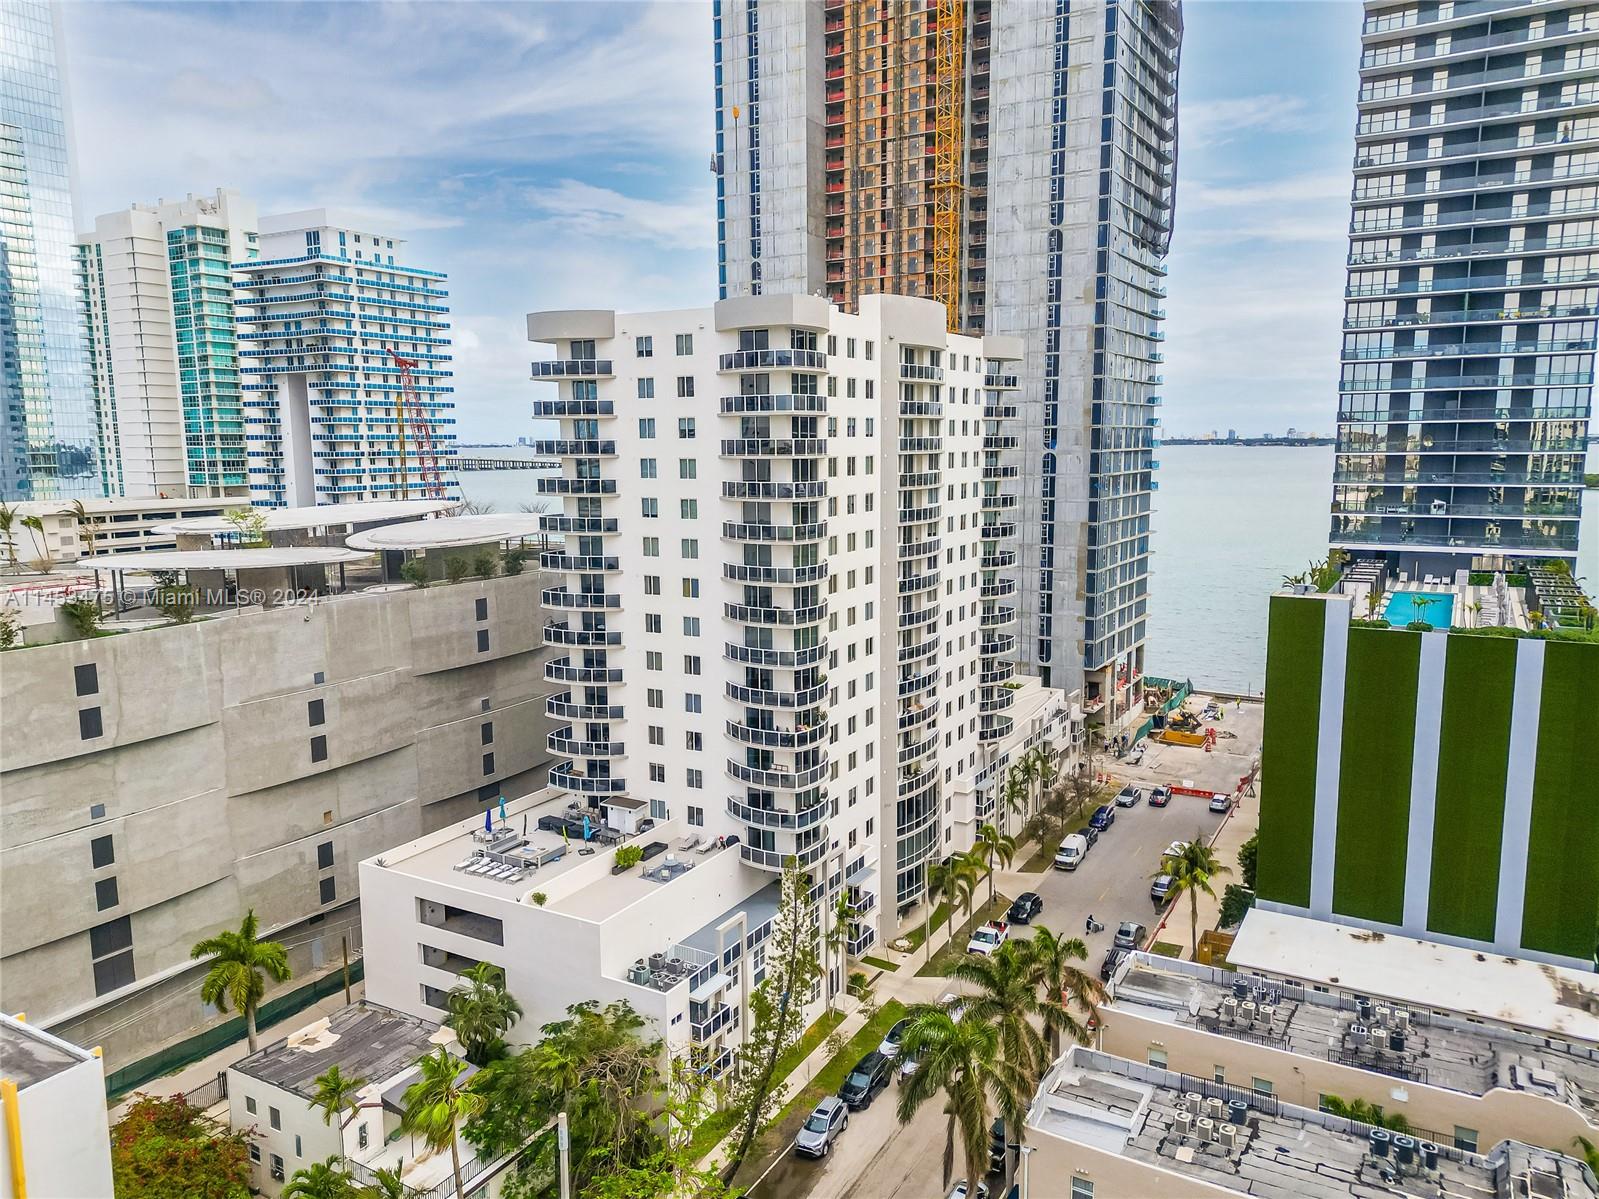 In the heart of East Edgewater. Beautiful 3 bedroom / 2 bathroom corner unit with wraparound balcony. Laminated wood floors in the living room. Granite countertops and stainless steel appliances. Amenities: fitness center, pool, social room, bicycle storage and more. Ideal for a family.